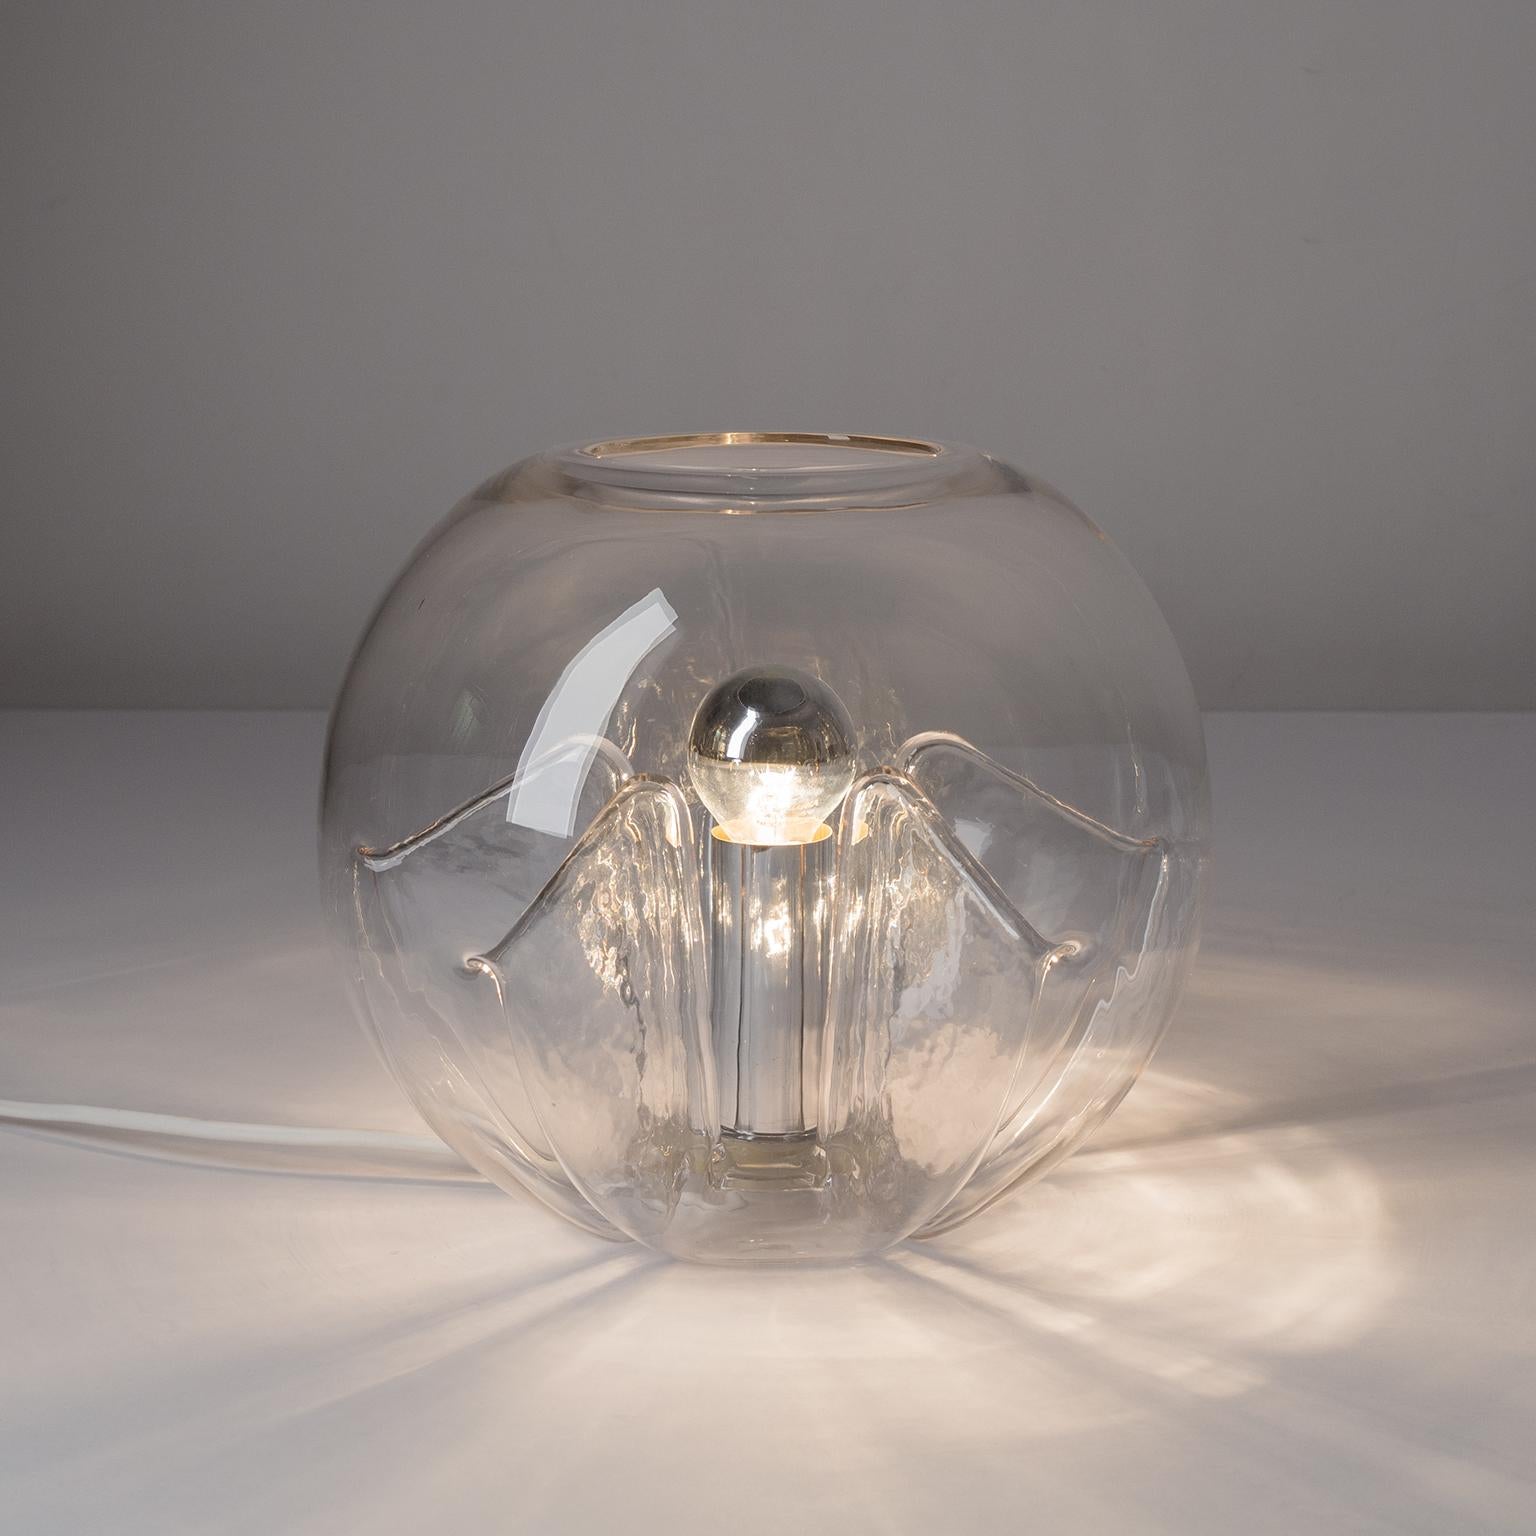 Space Age Murano Glass Table Lamp, 1970s, by Toni Zuccheri for VeArt For Sale